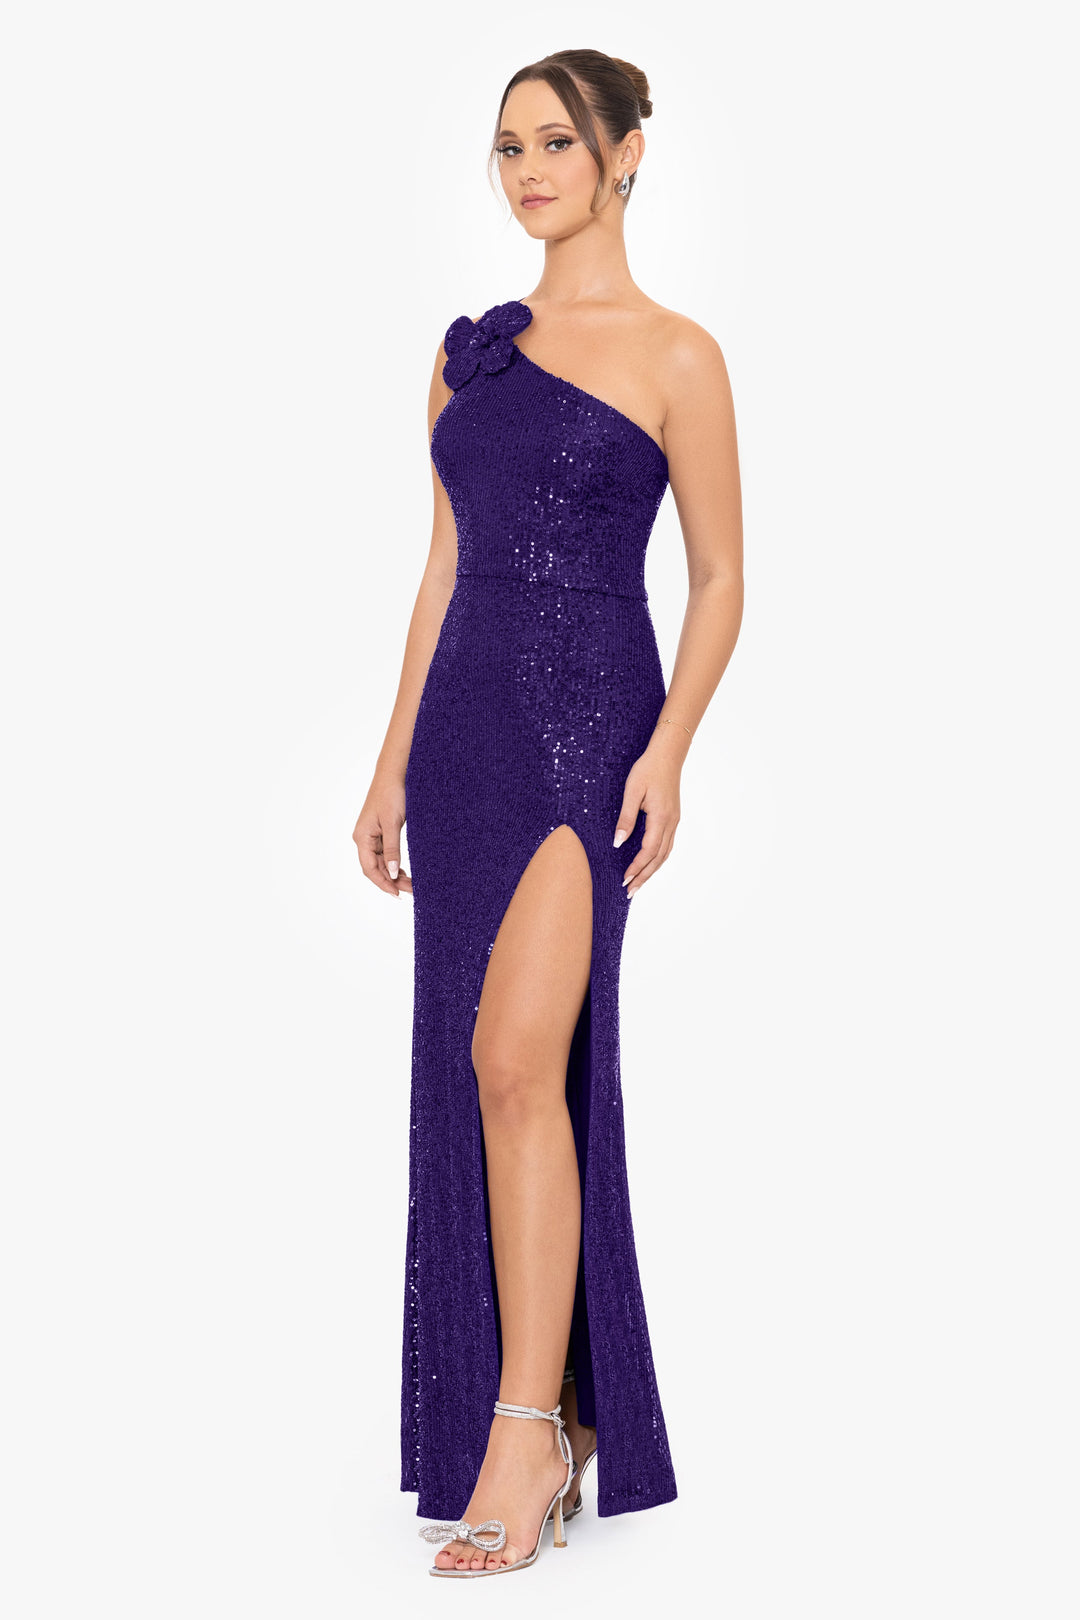 "Tracey" Long One Shoulder Sequin Dress with Flower Detail